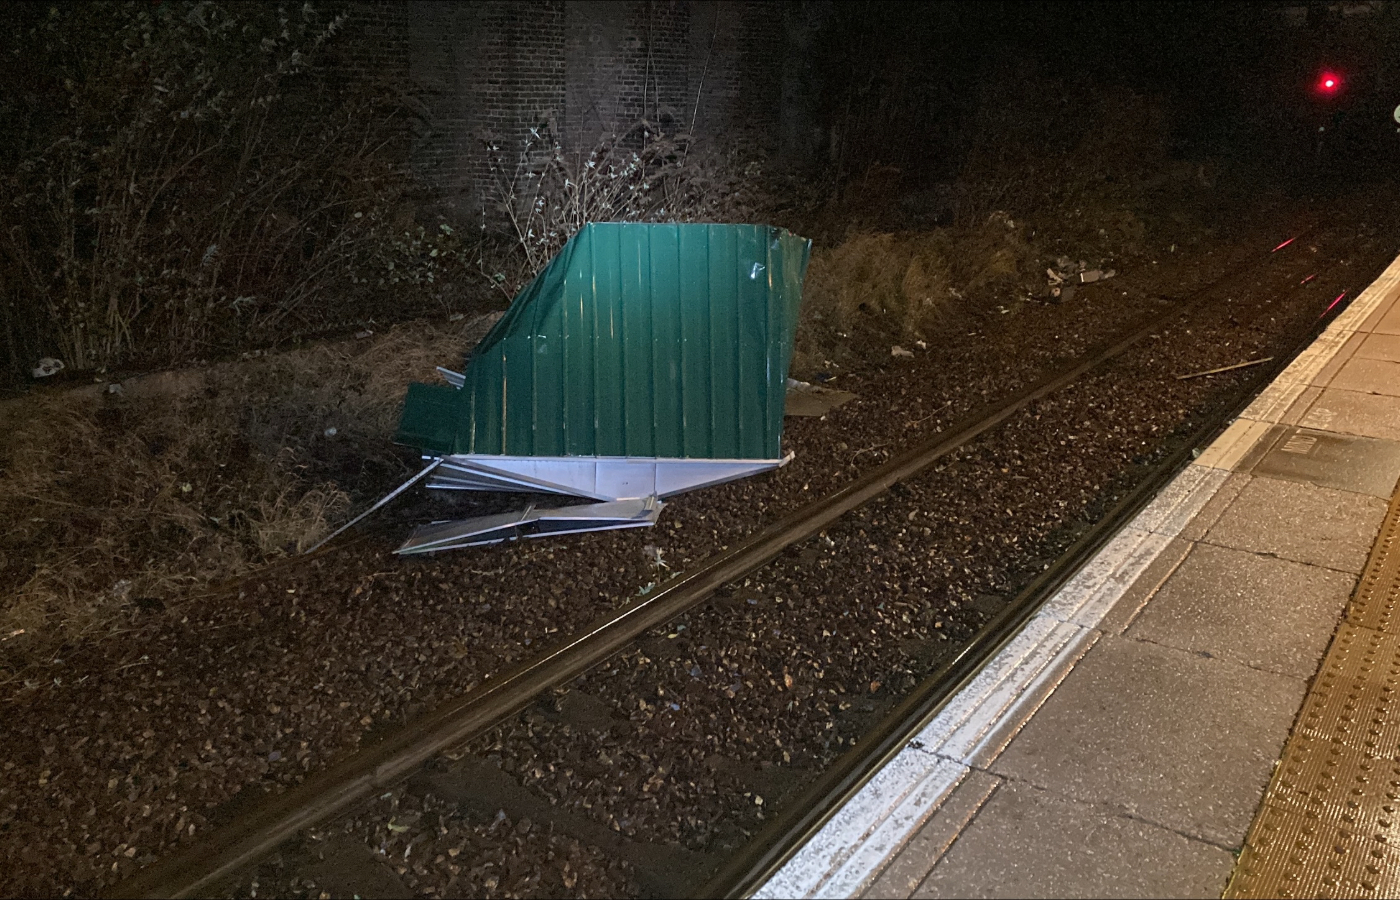 Part of a garden shed on the line at Bellgrove station in Glasgow caused by strong winds from Storm Isha.